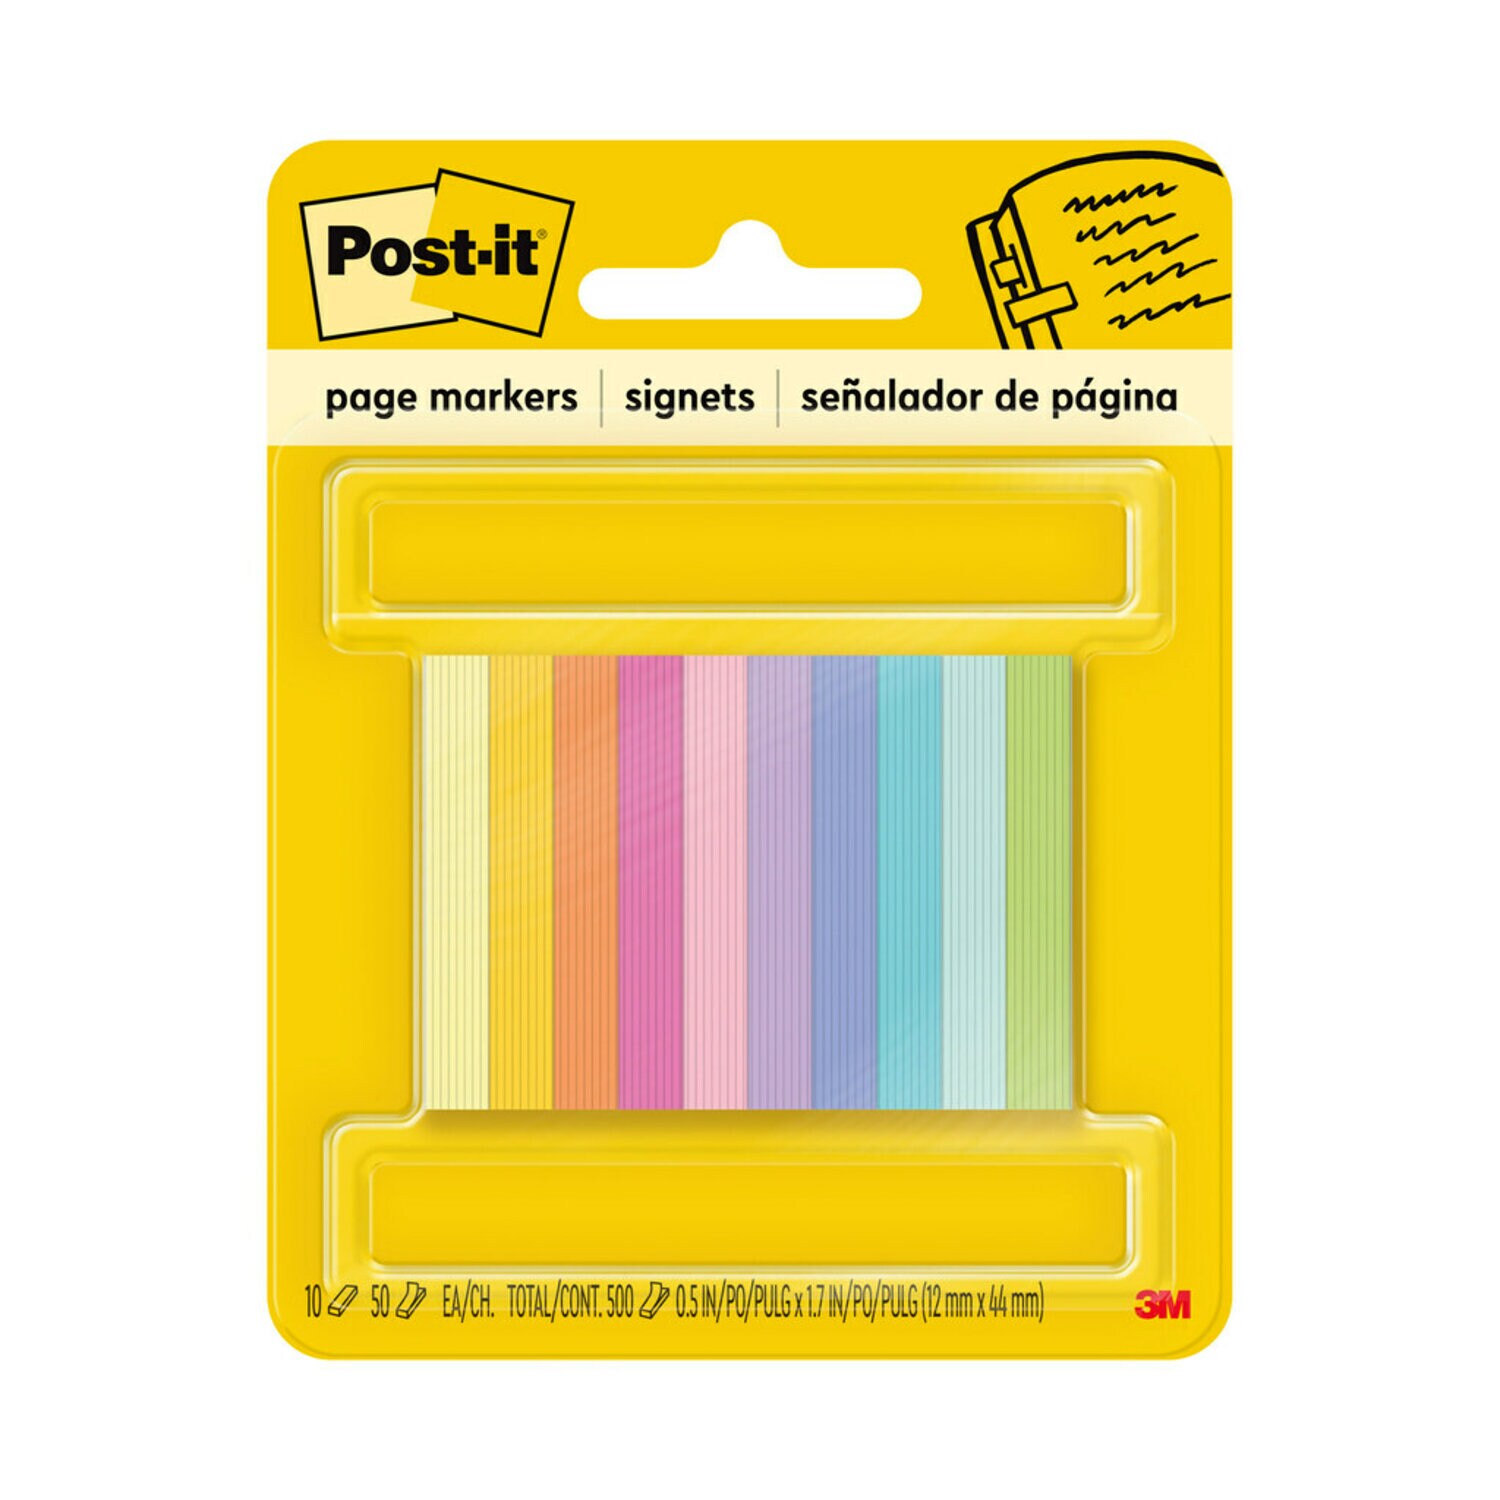 7100138892 - Post-it Page Marker, 670-10AB, 1/2 in x 1 3/4 in (12,7 mm x 44,4 mm)